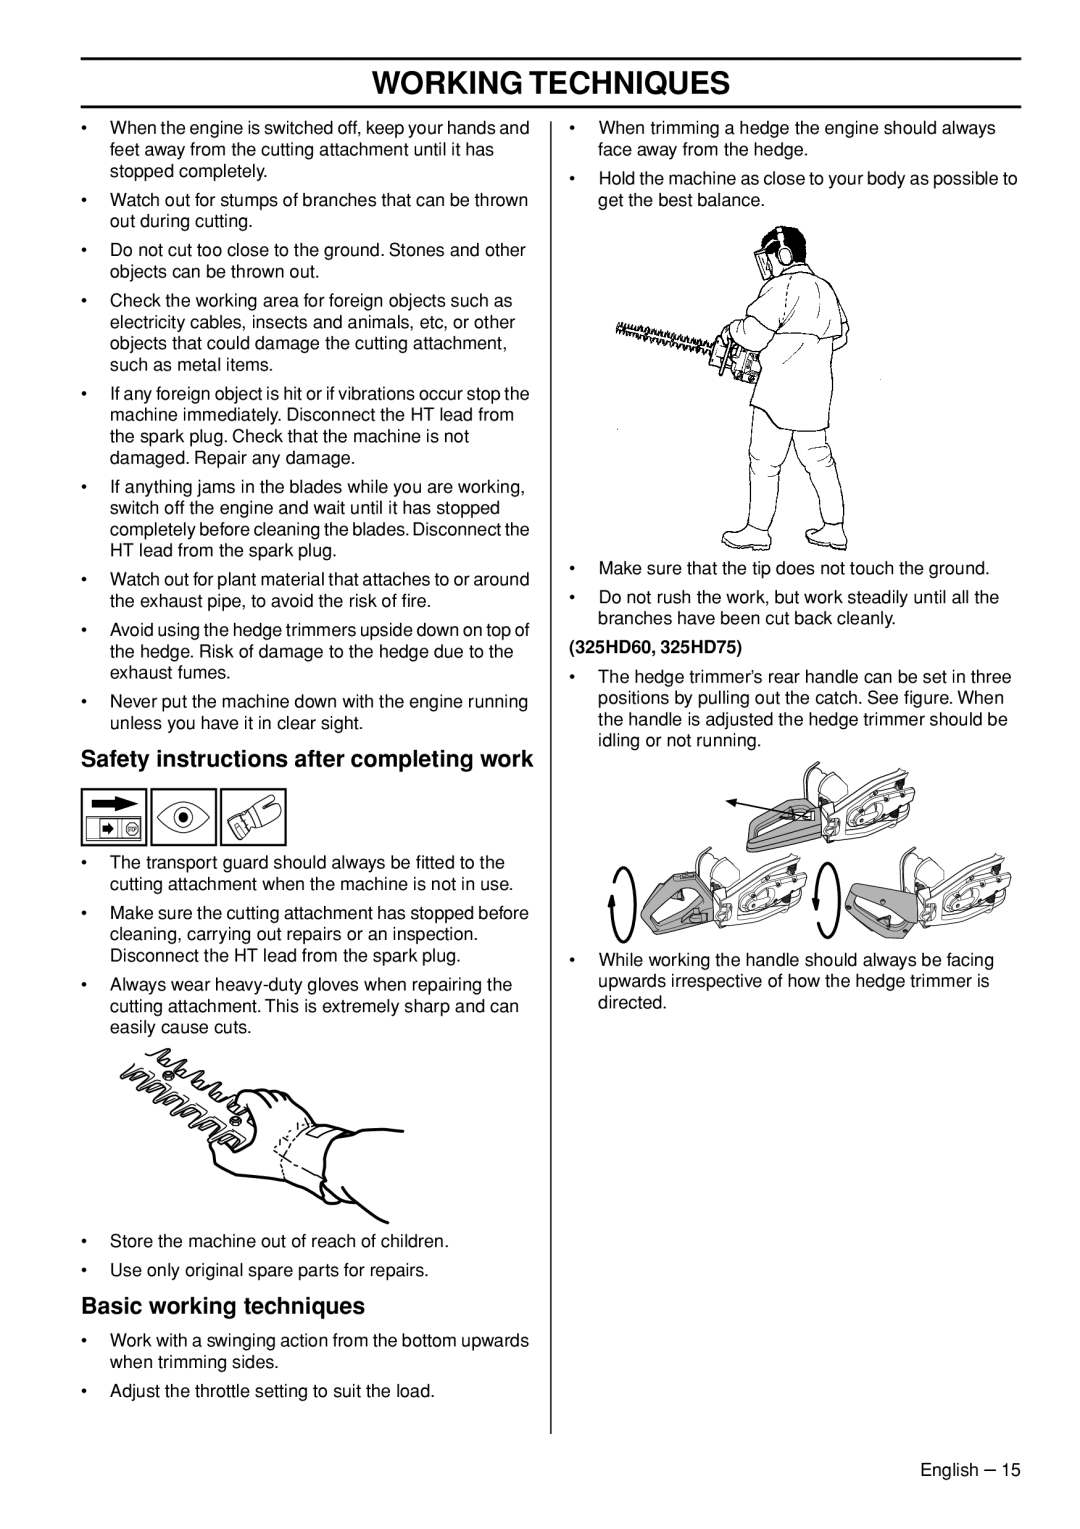 Husqvarna 325HD60X, 325HD75X manual Safety instructions after completing work, Basic working techniques, Working Techniques 